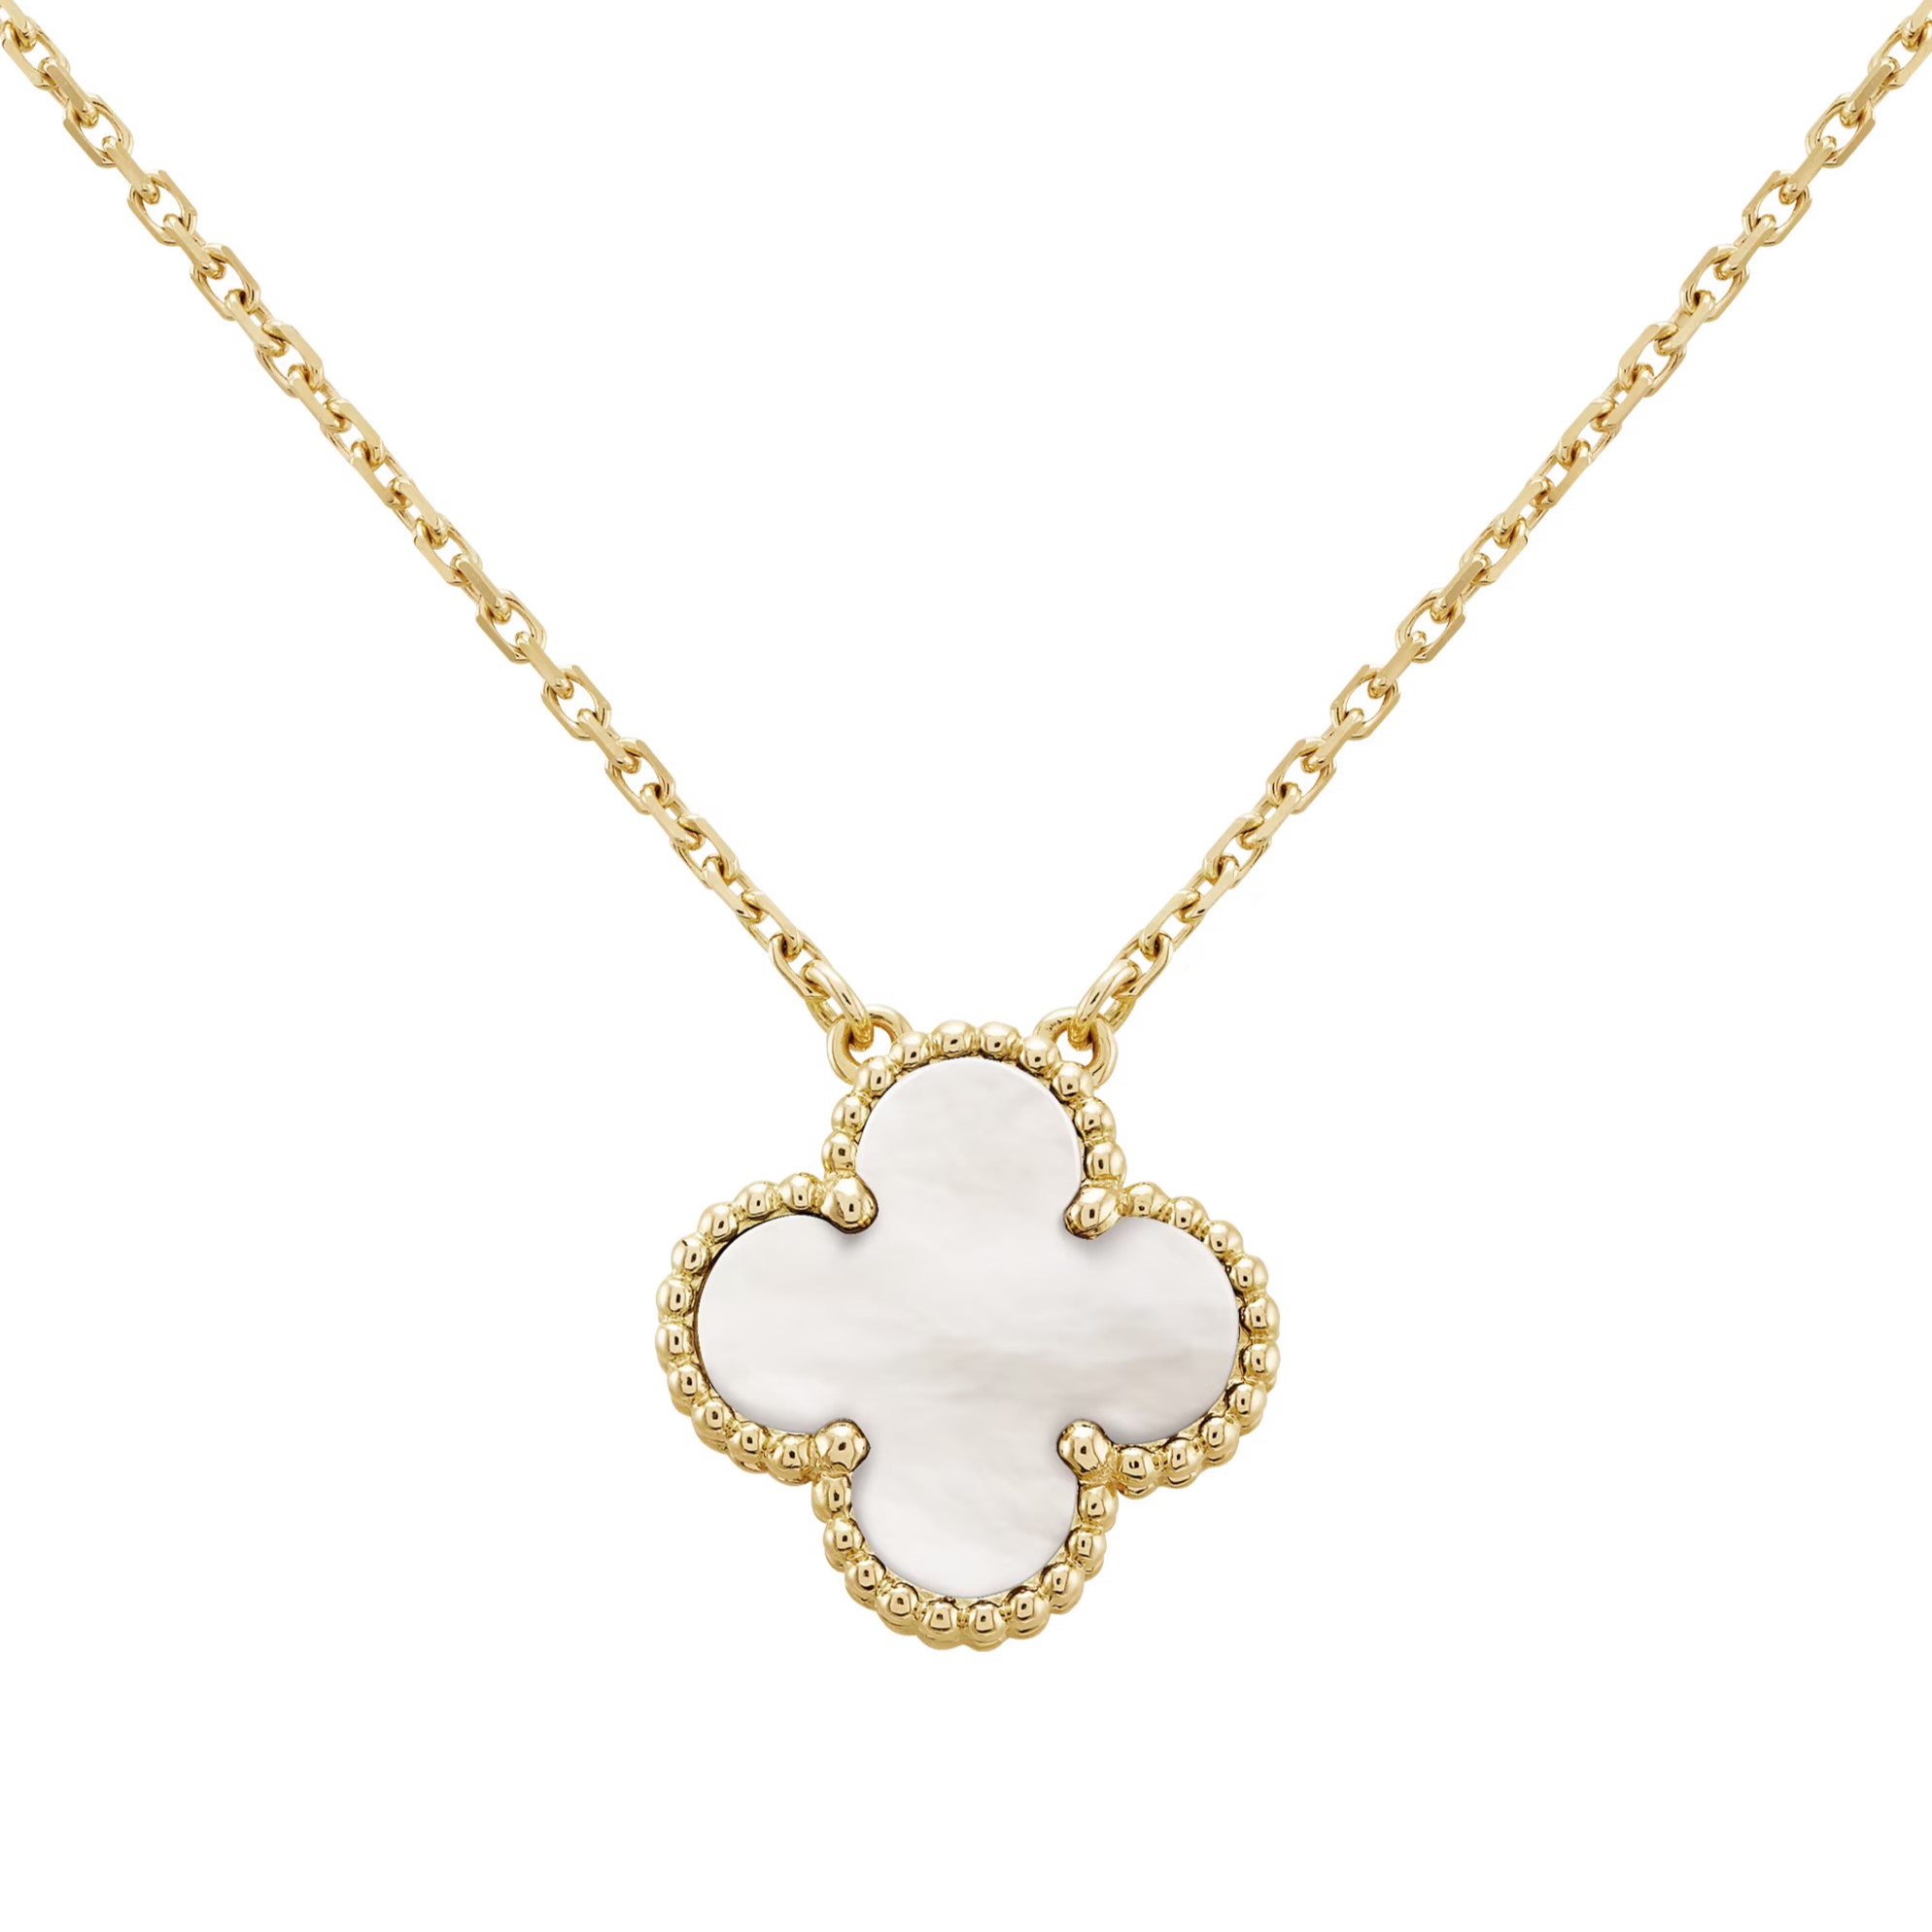 DÂY CHUYỀN NỮ THỜI TRANG CỎ 4 LÁ VAN CLEEF ARPELS VINTAGE ALHAMBRA NECKLACE PENDANT IN STONE WHITE MOTHER-OF-PEARL VCARA45900 1